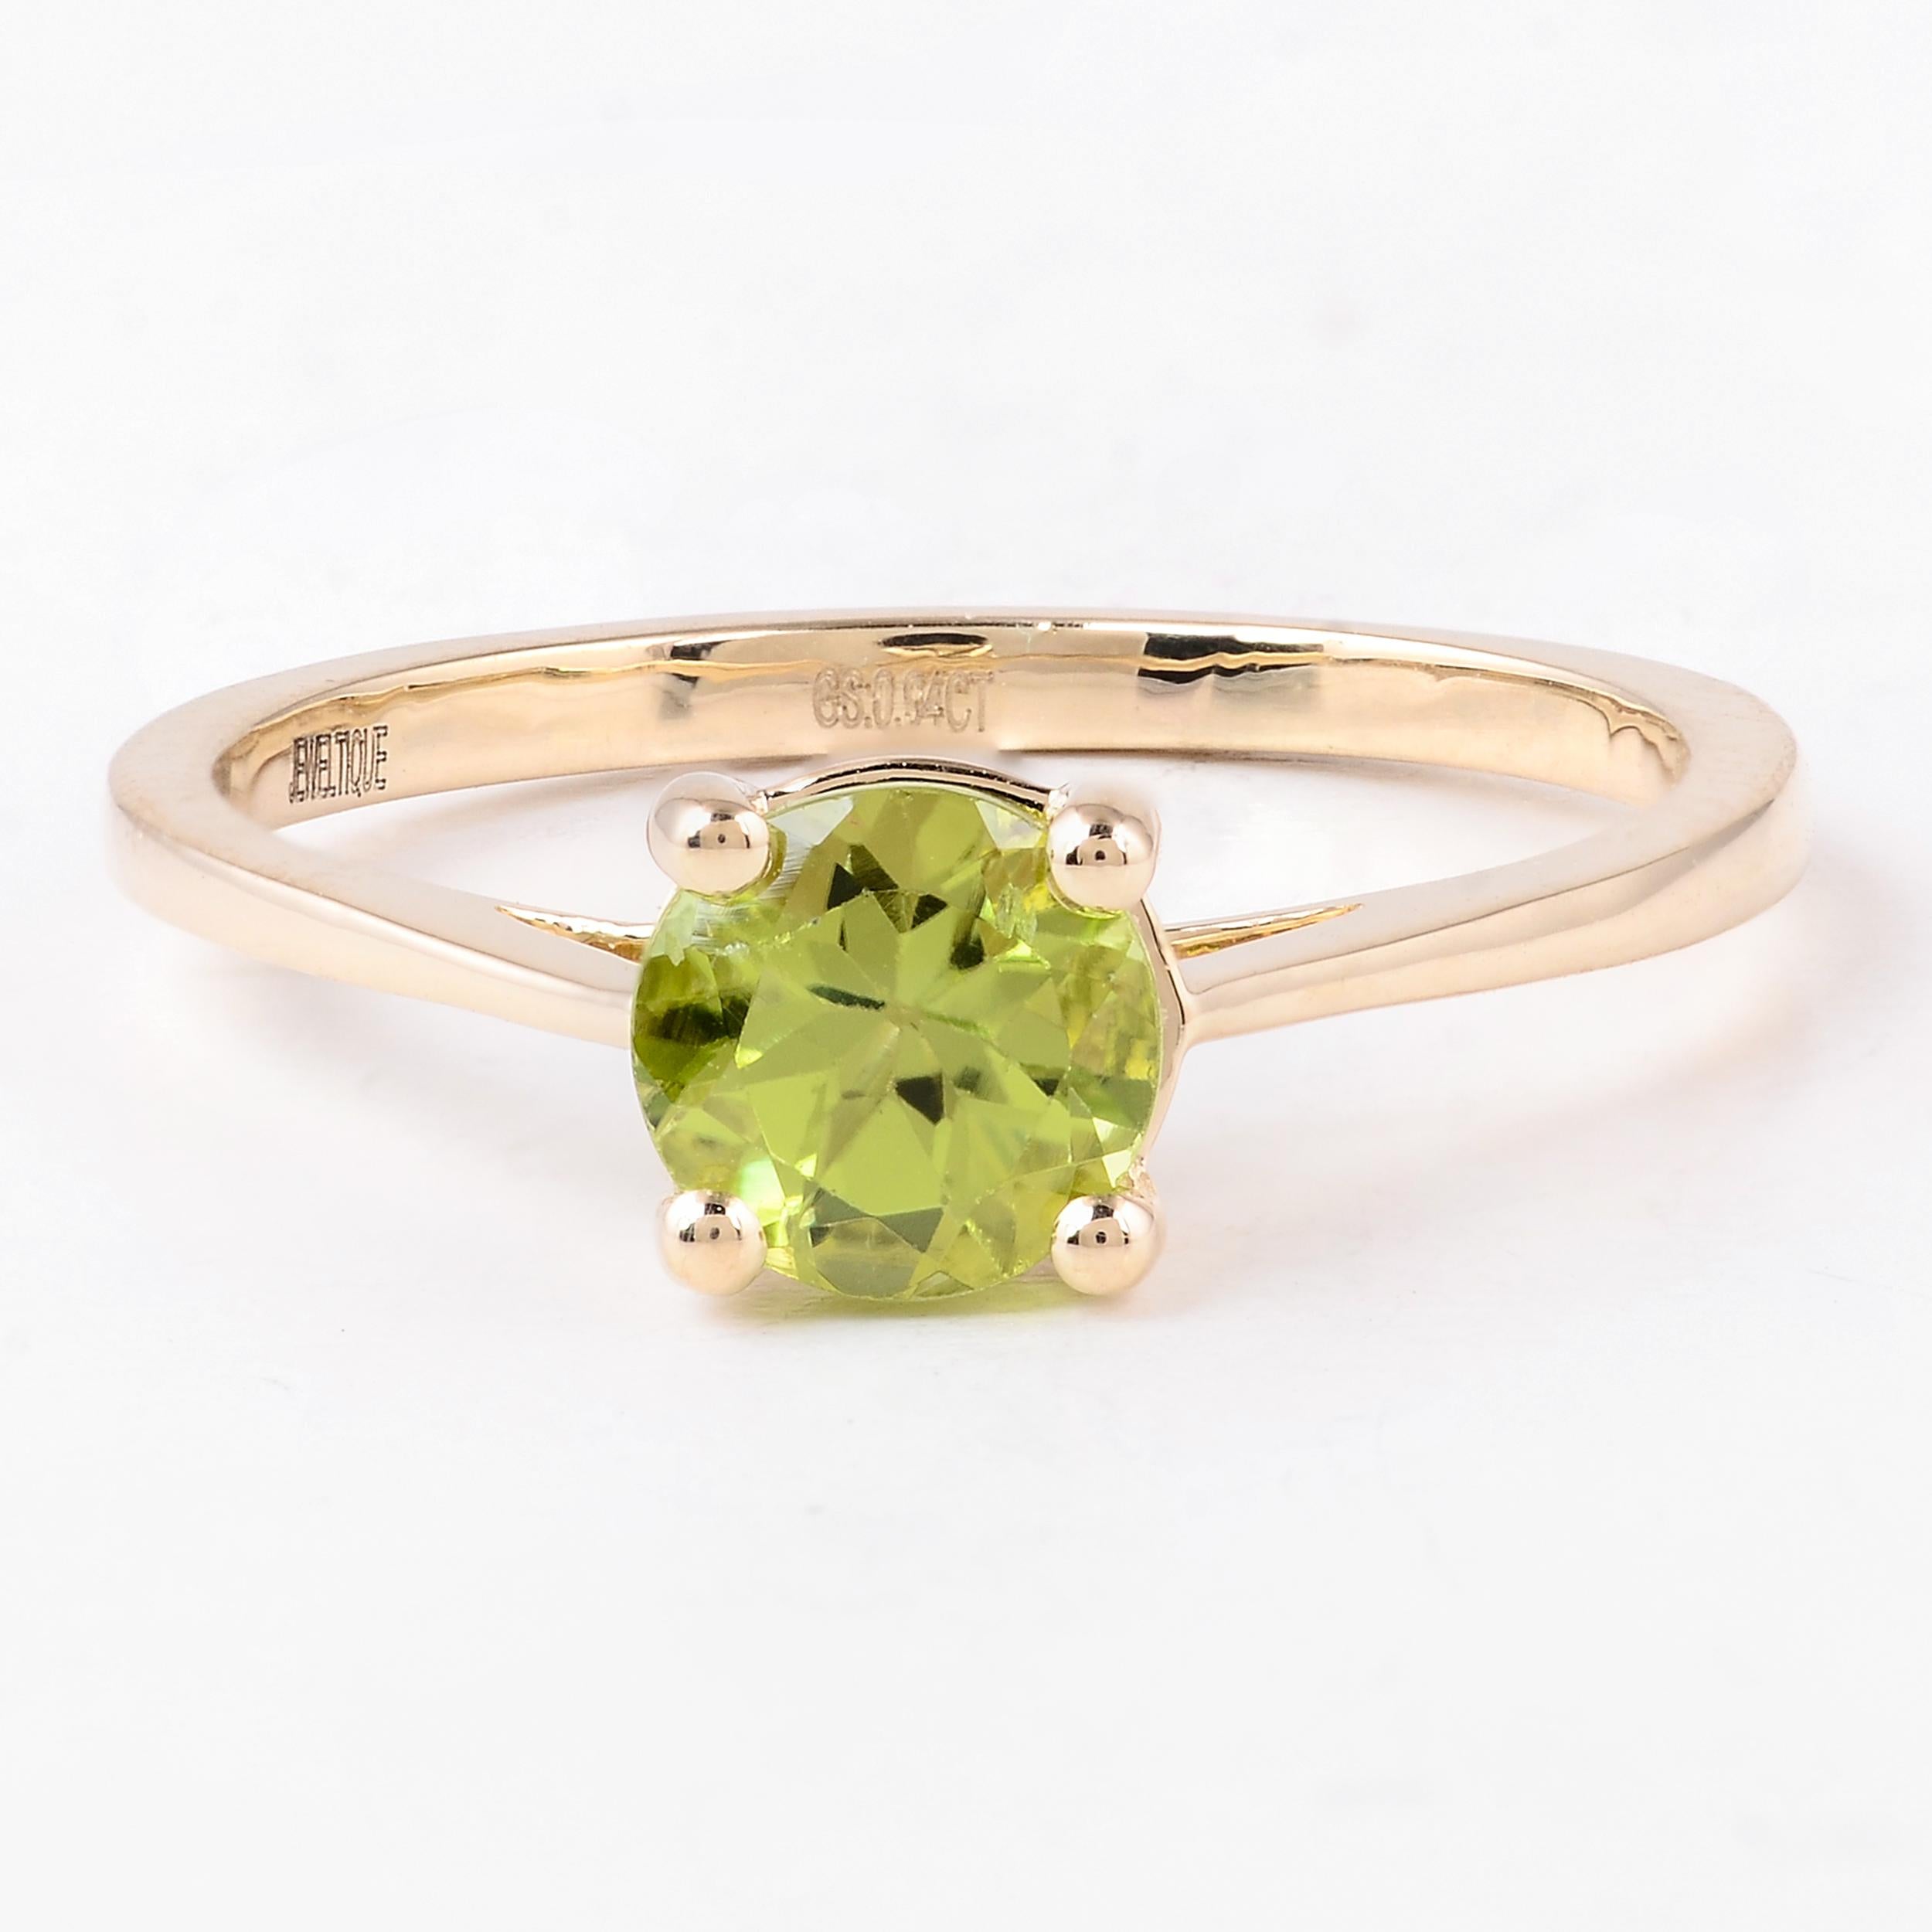 Elegant 14K Peridot Cocktail Ring, Size 7 - Stunning Statement Jewelry Piece In New Condition For Sale In Holtsville, NY